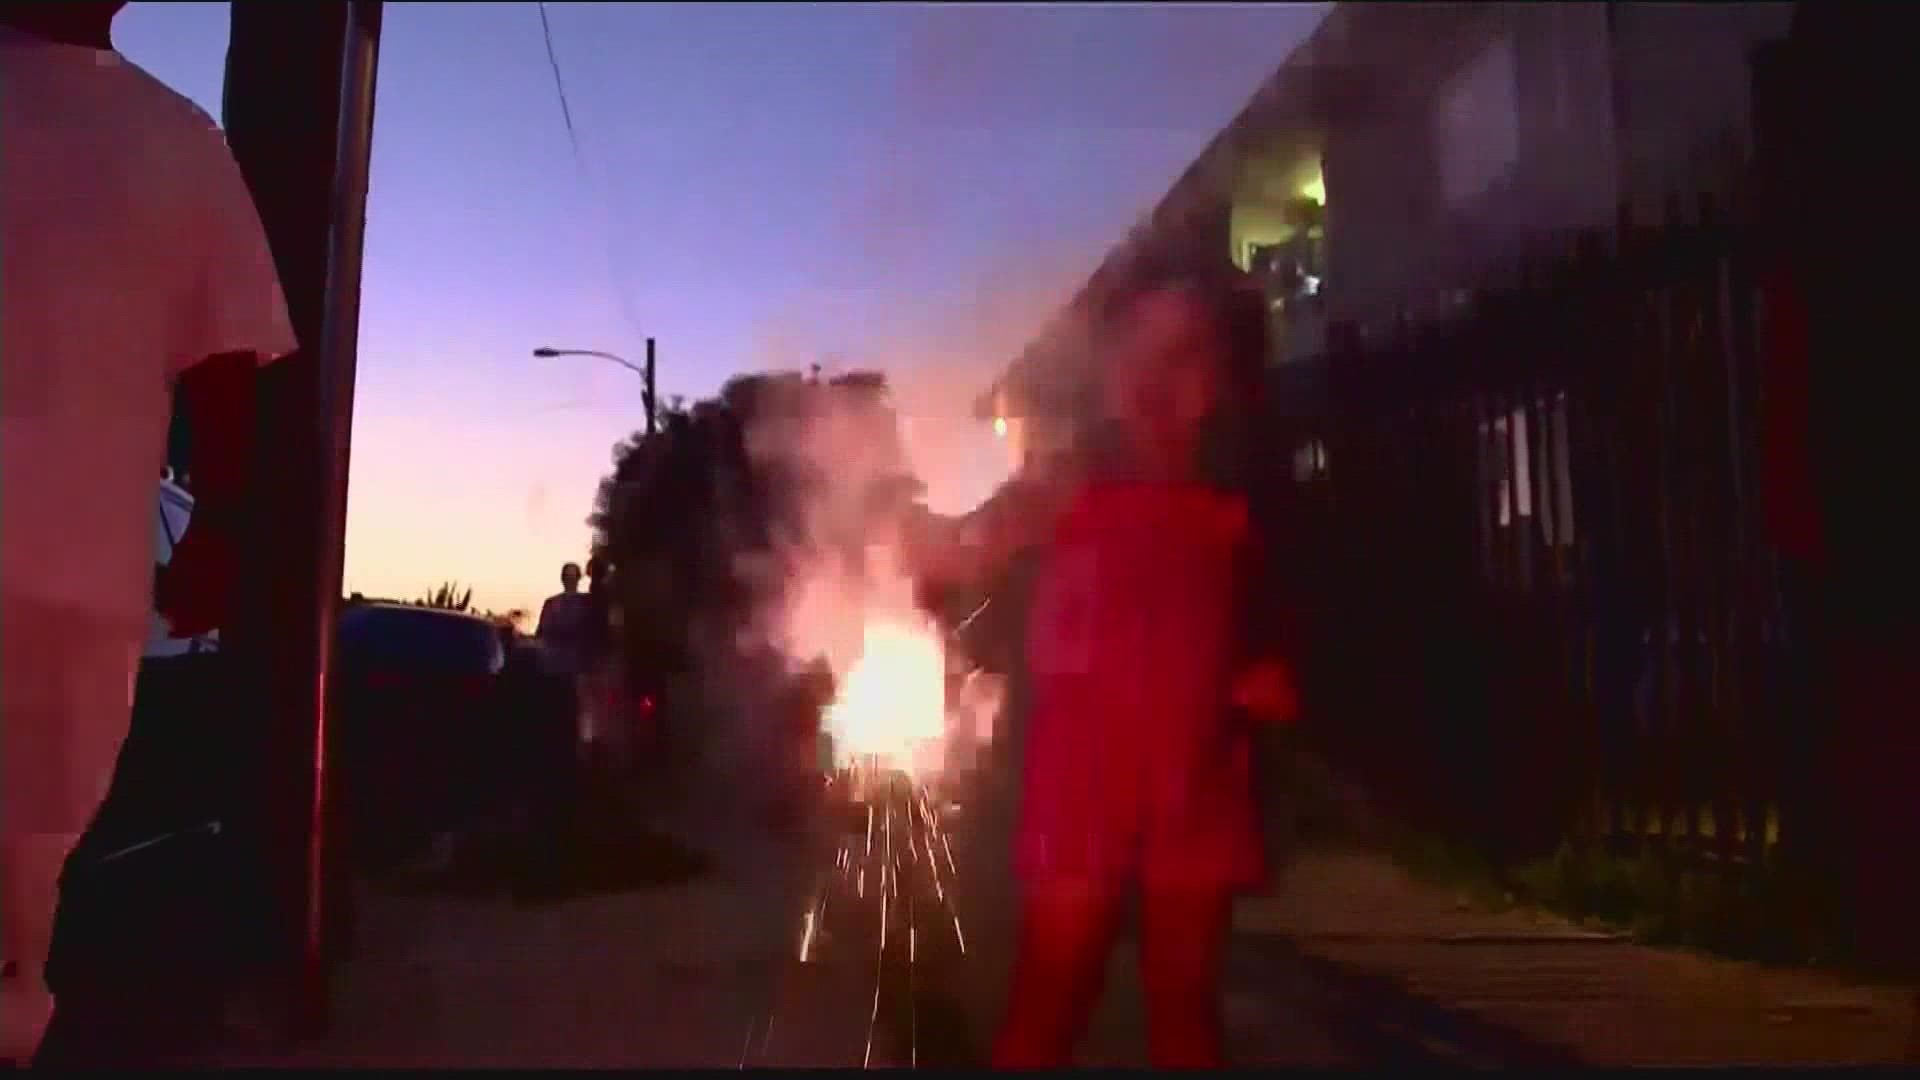 The consumer Product Safety Commission found more than 11-thousand people were injured by fireworks just last year alone.